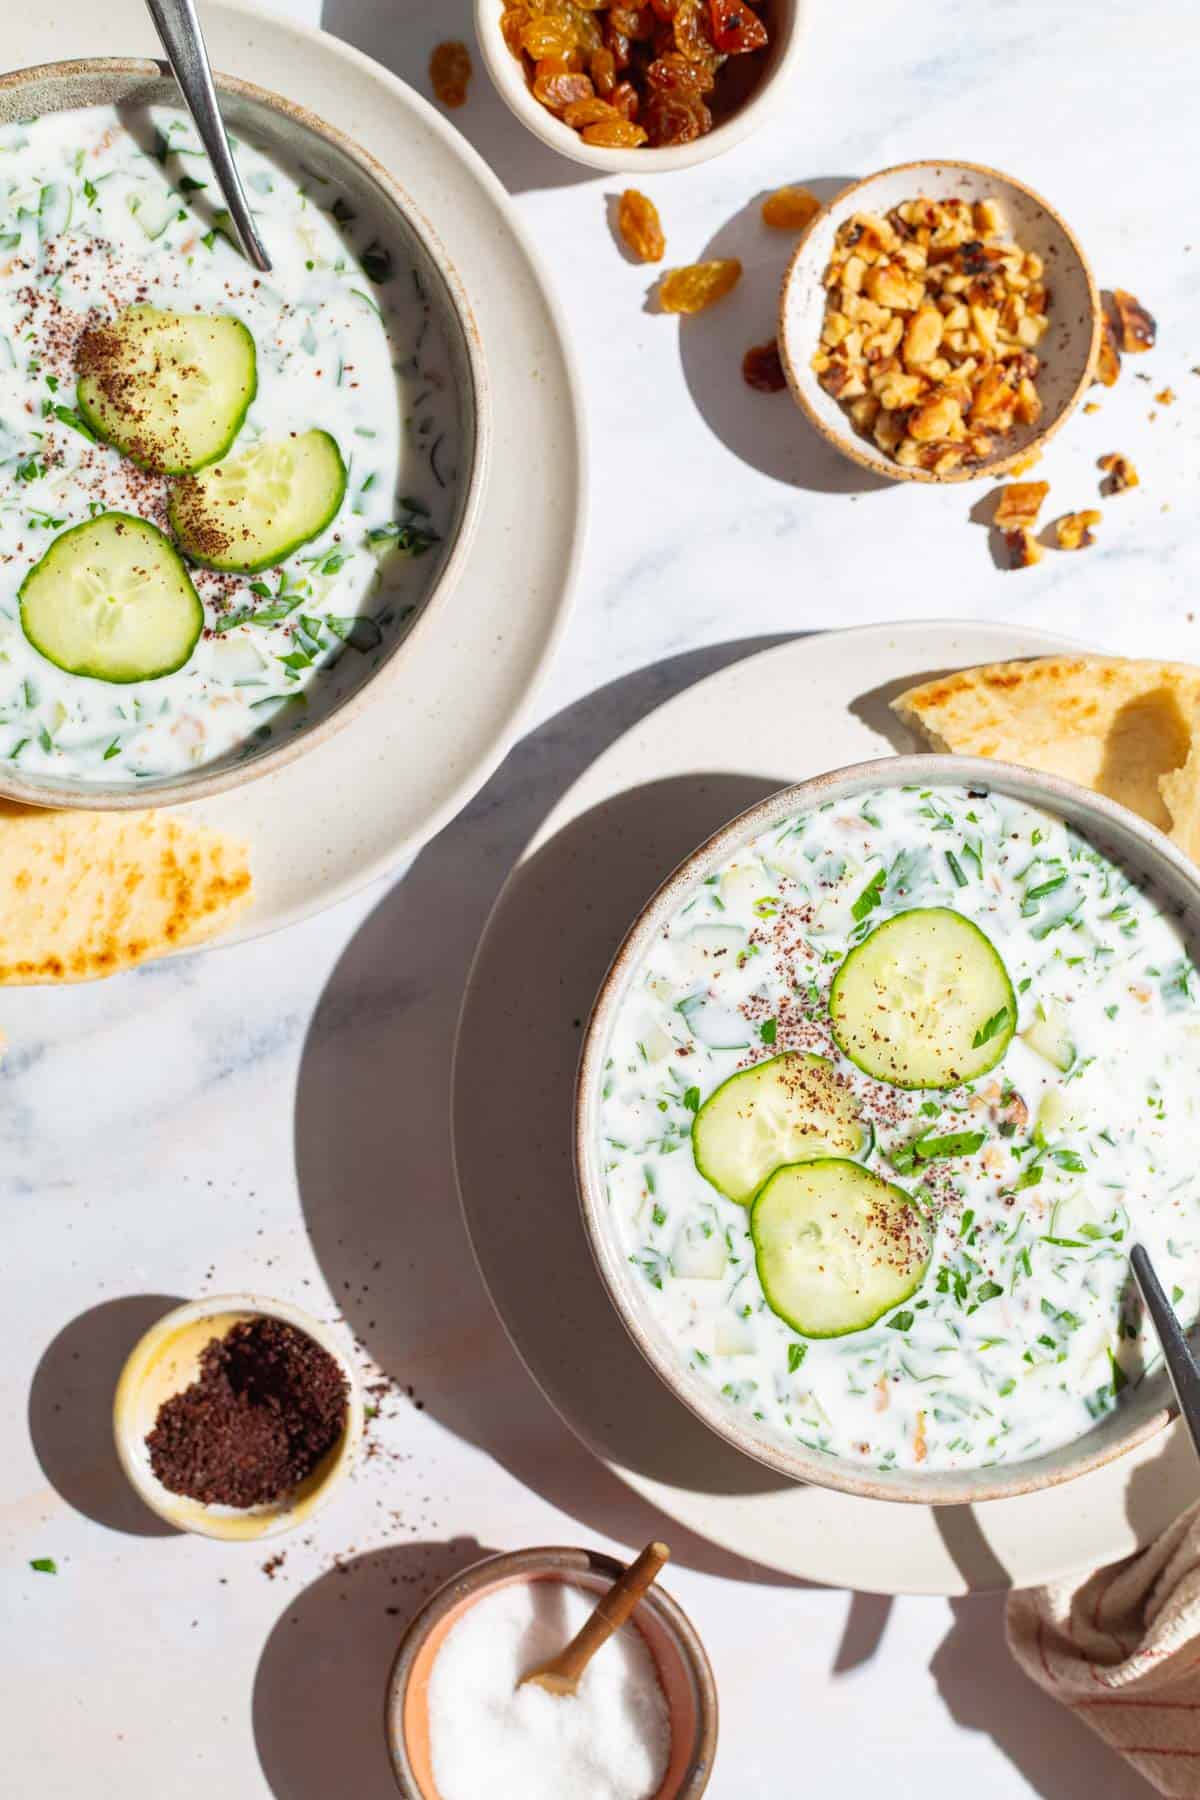 An overhead photo of two bowls of cucumber soup garnished with sumac, parsley and cucumber slices with spoons on plates with slices of pita bread. Next to these are bowls of walnuts, salt, golden raisins and sumac.